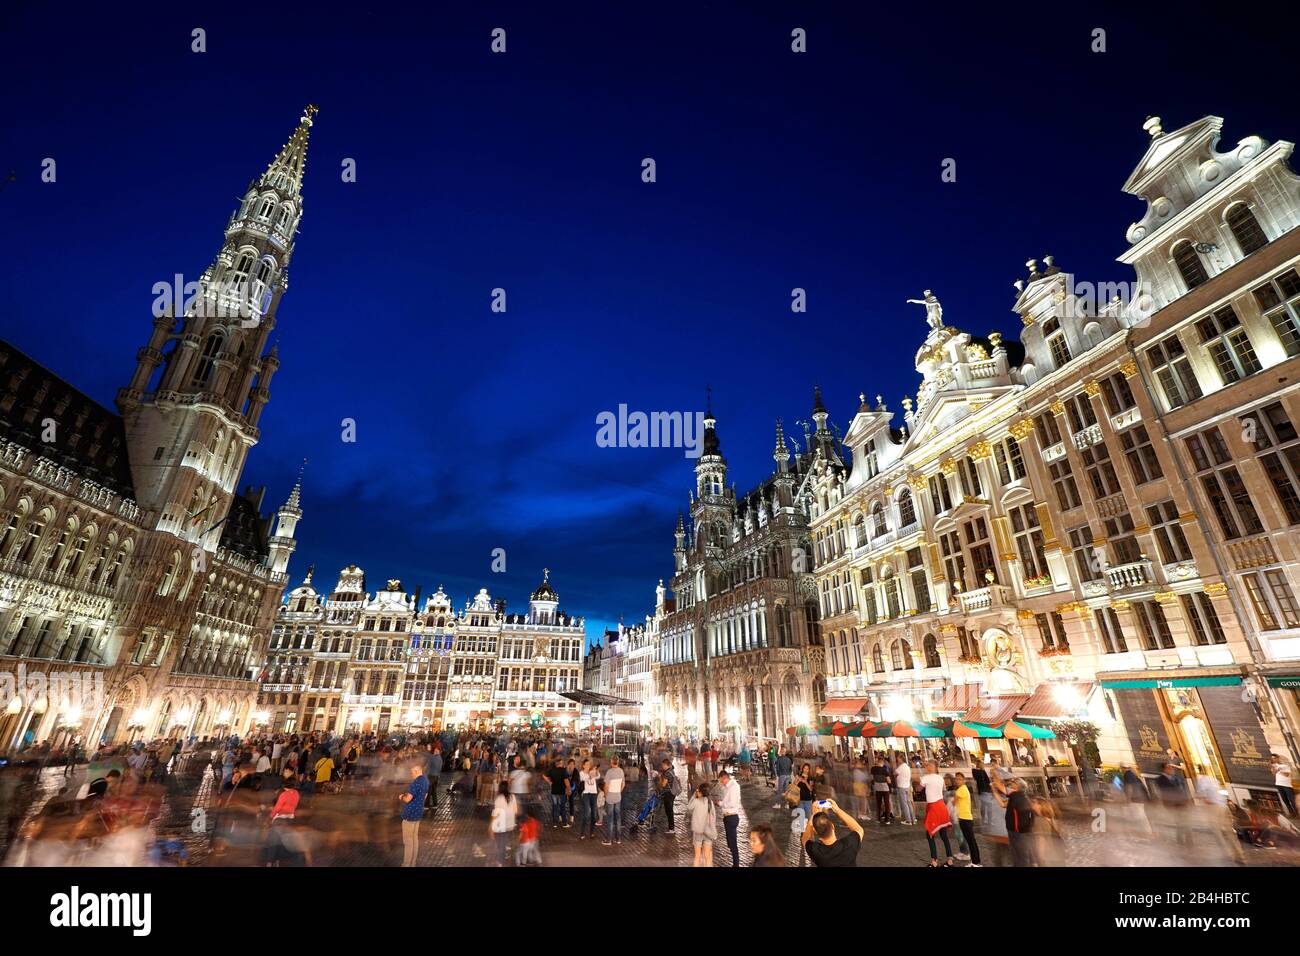 Europe, Belgium, Brussels, Old Town, Grand Place, Grote Markt, Historic Buildings, City Hall, Tourists, evening, illuminated Stock Photo